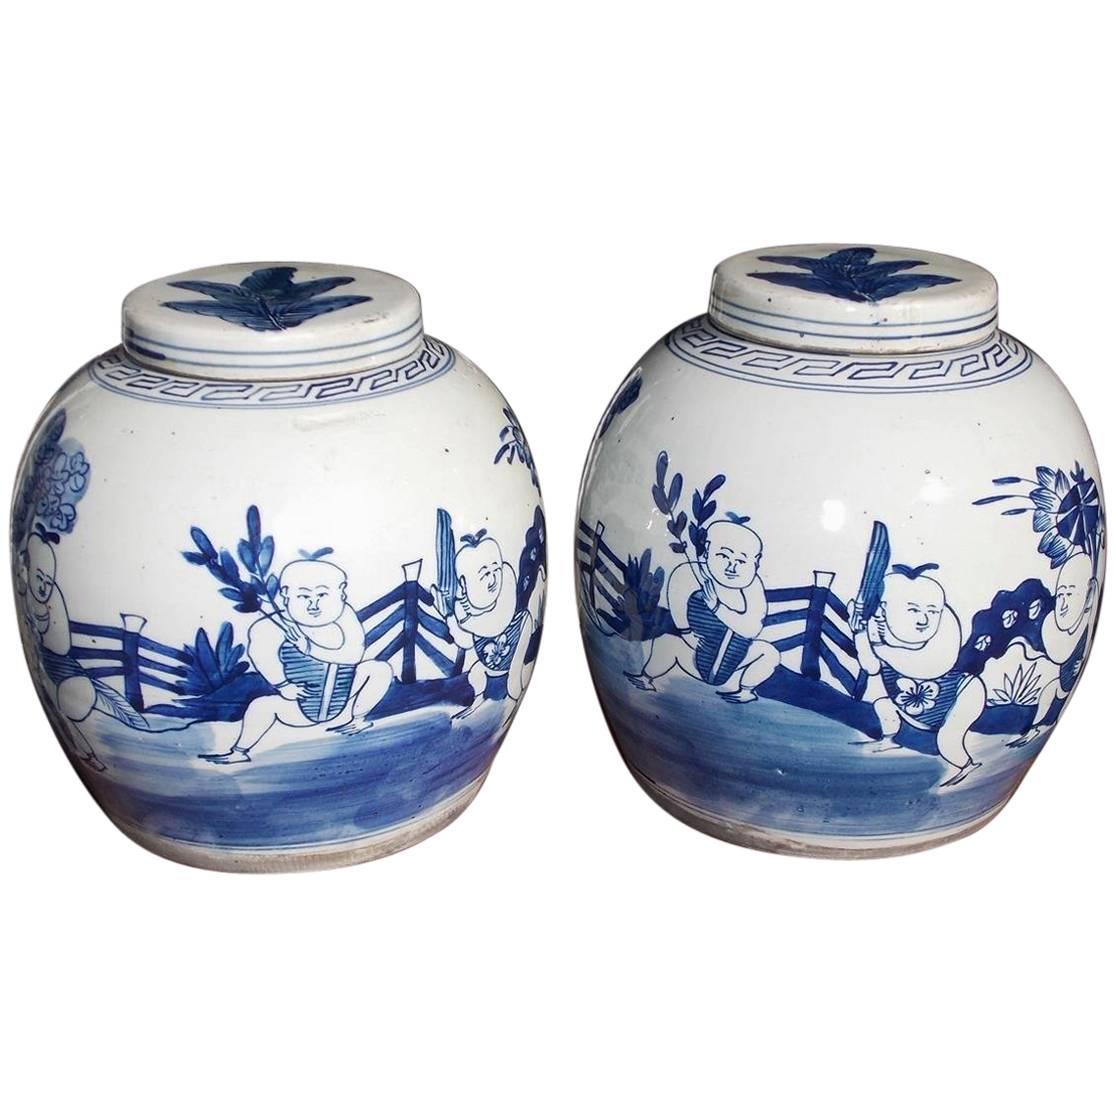 Pair of Chinese Porcelain Glazed Figural Ginger Jars with Lids, 20th Century